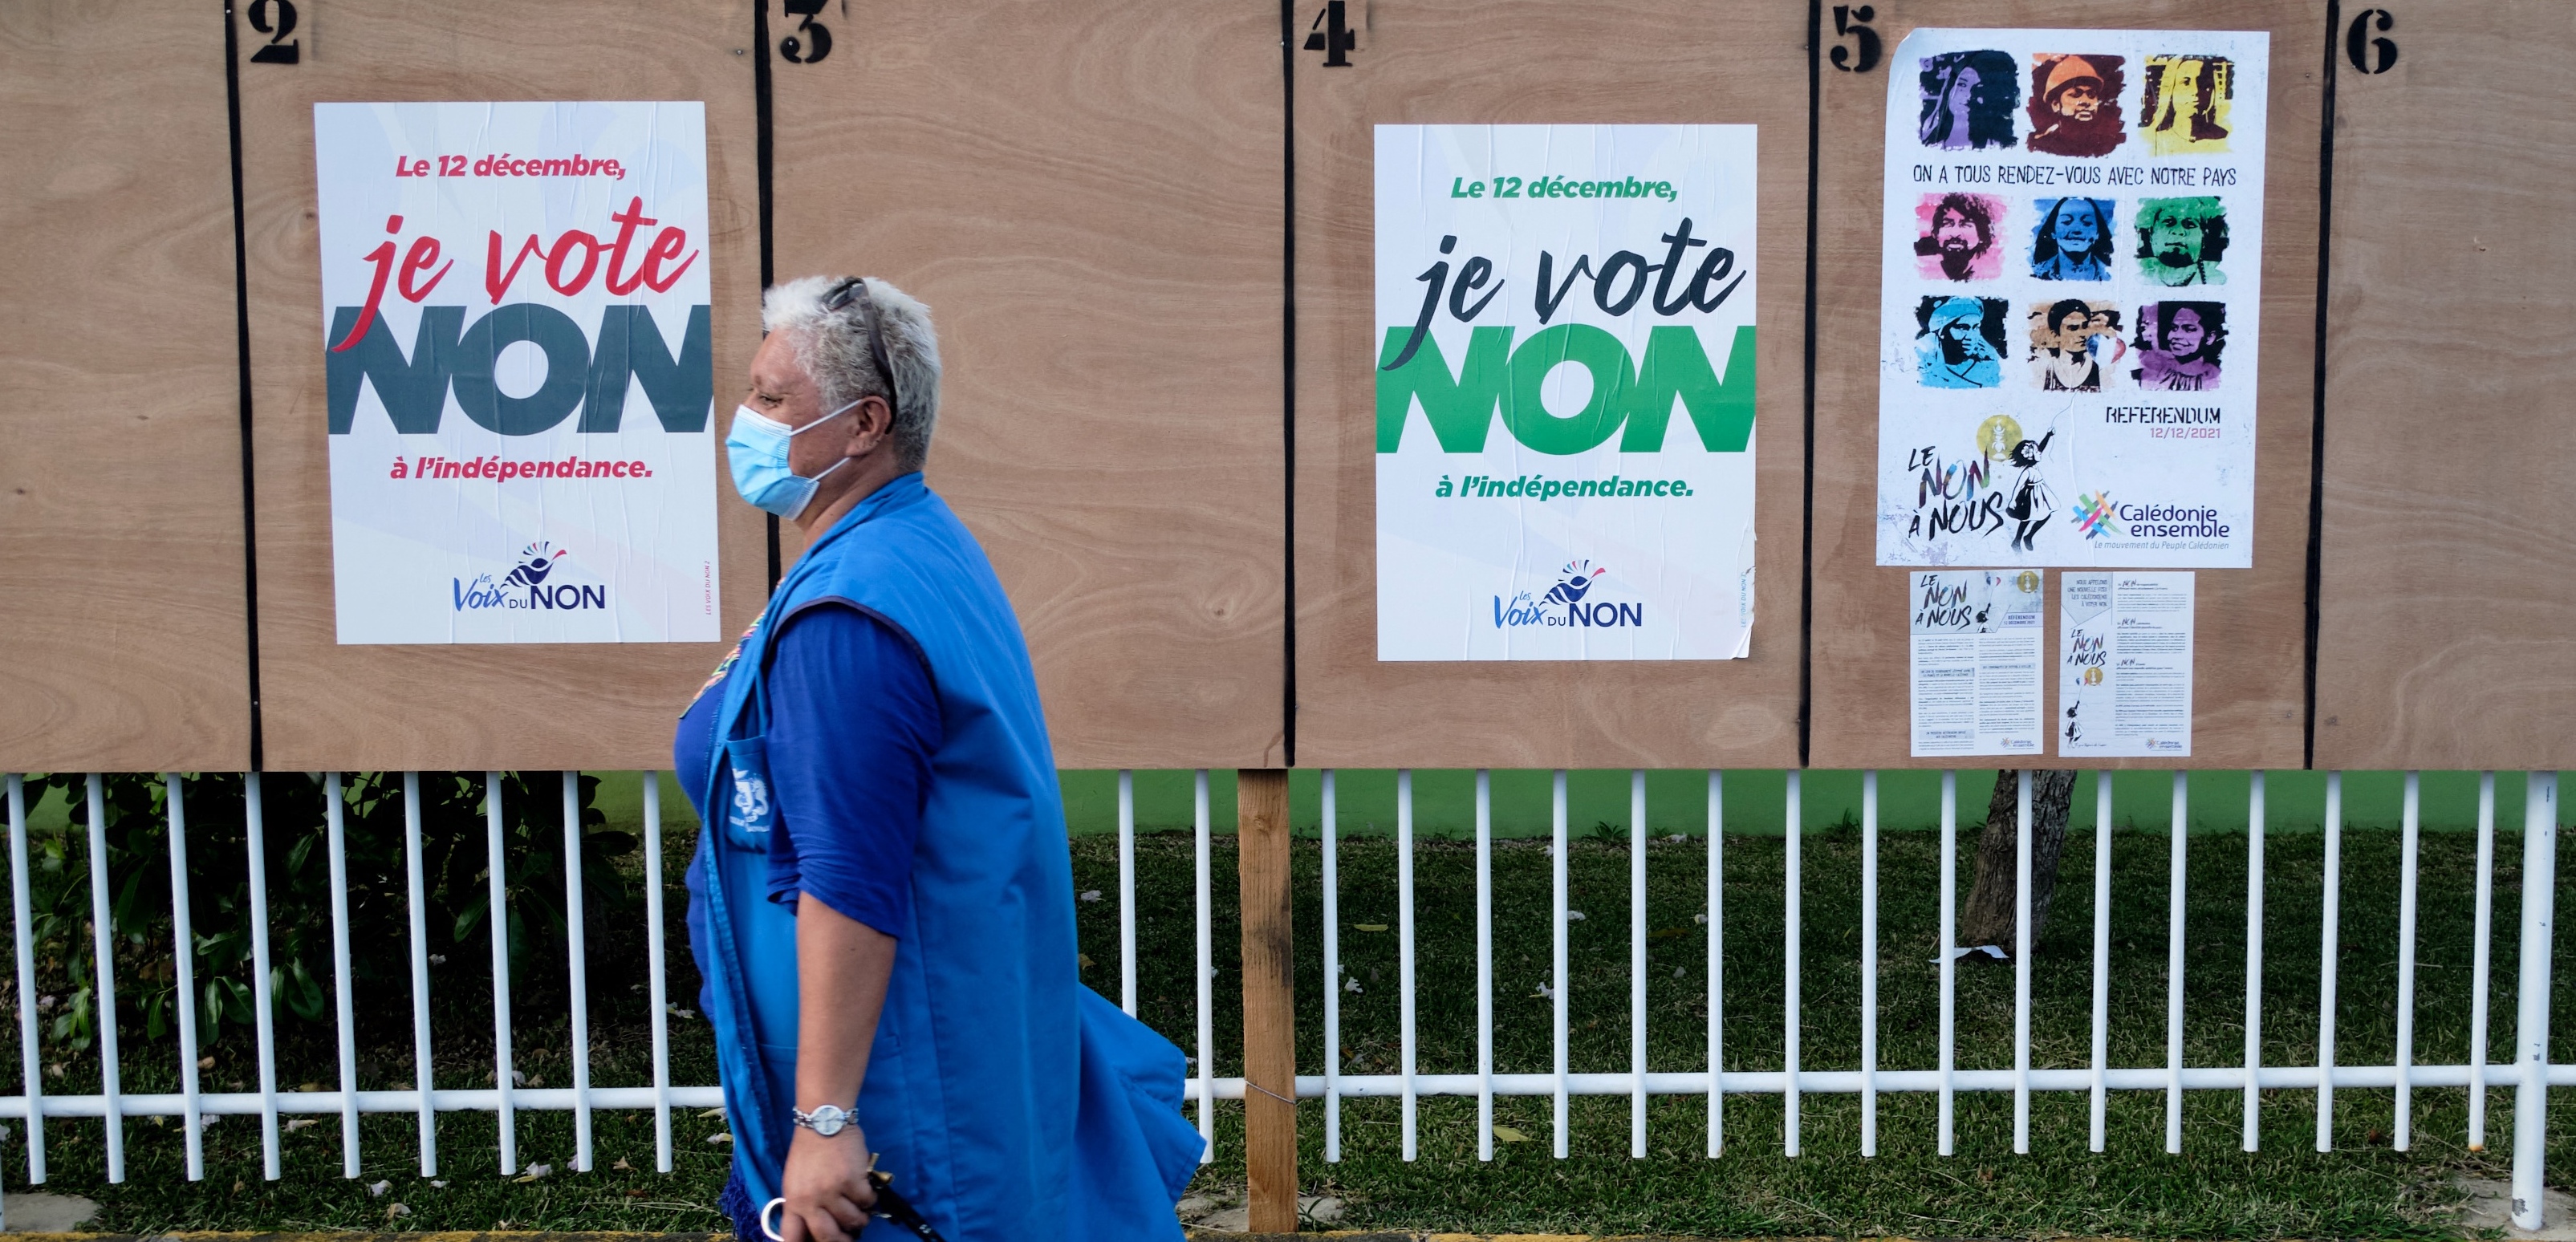 A woman walks past electoral boards near a polling station ahead of the referendum on independence in Noumea, on the French South Pacific territory of New Caledonia, on December 10, 2021.